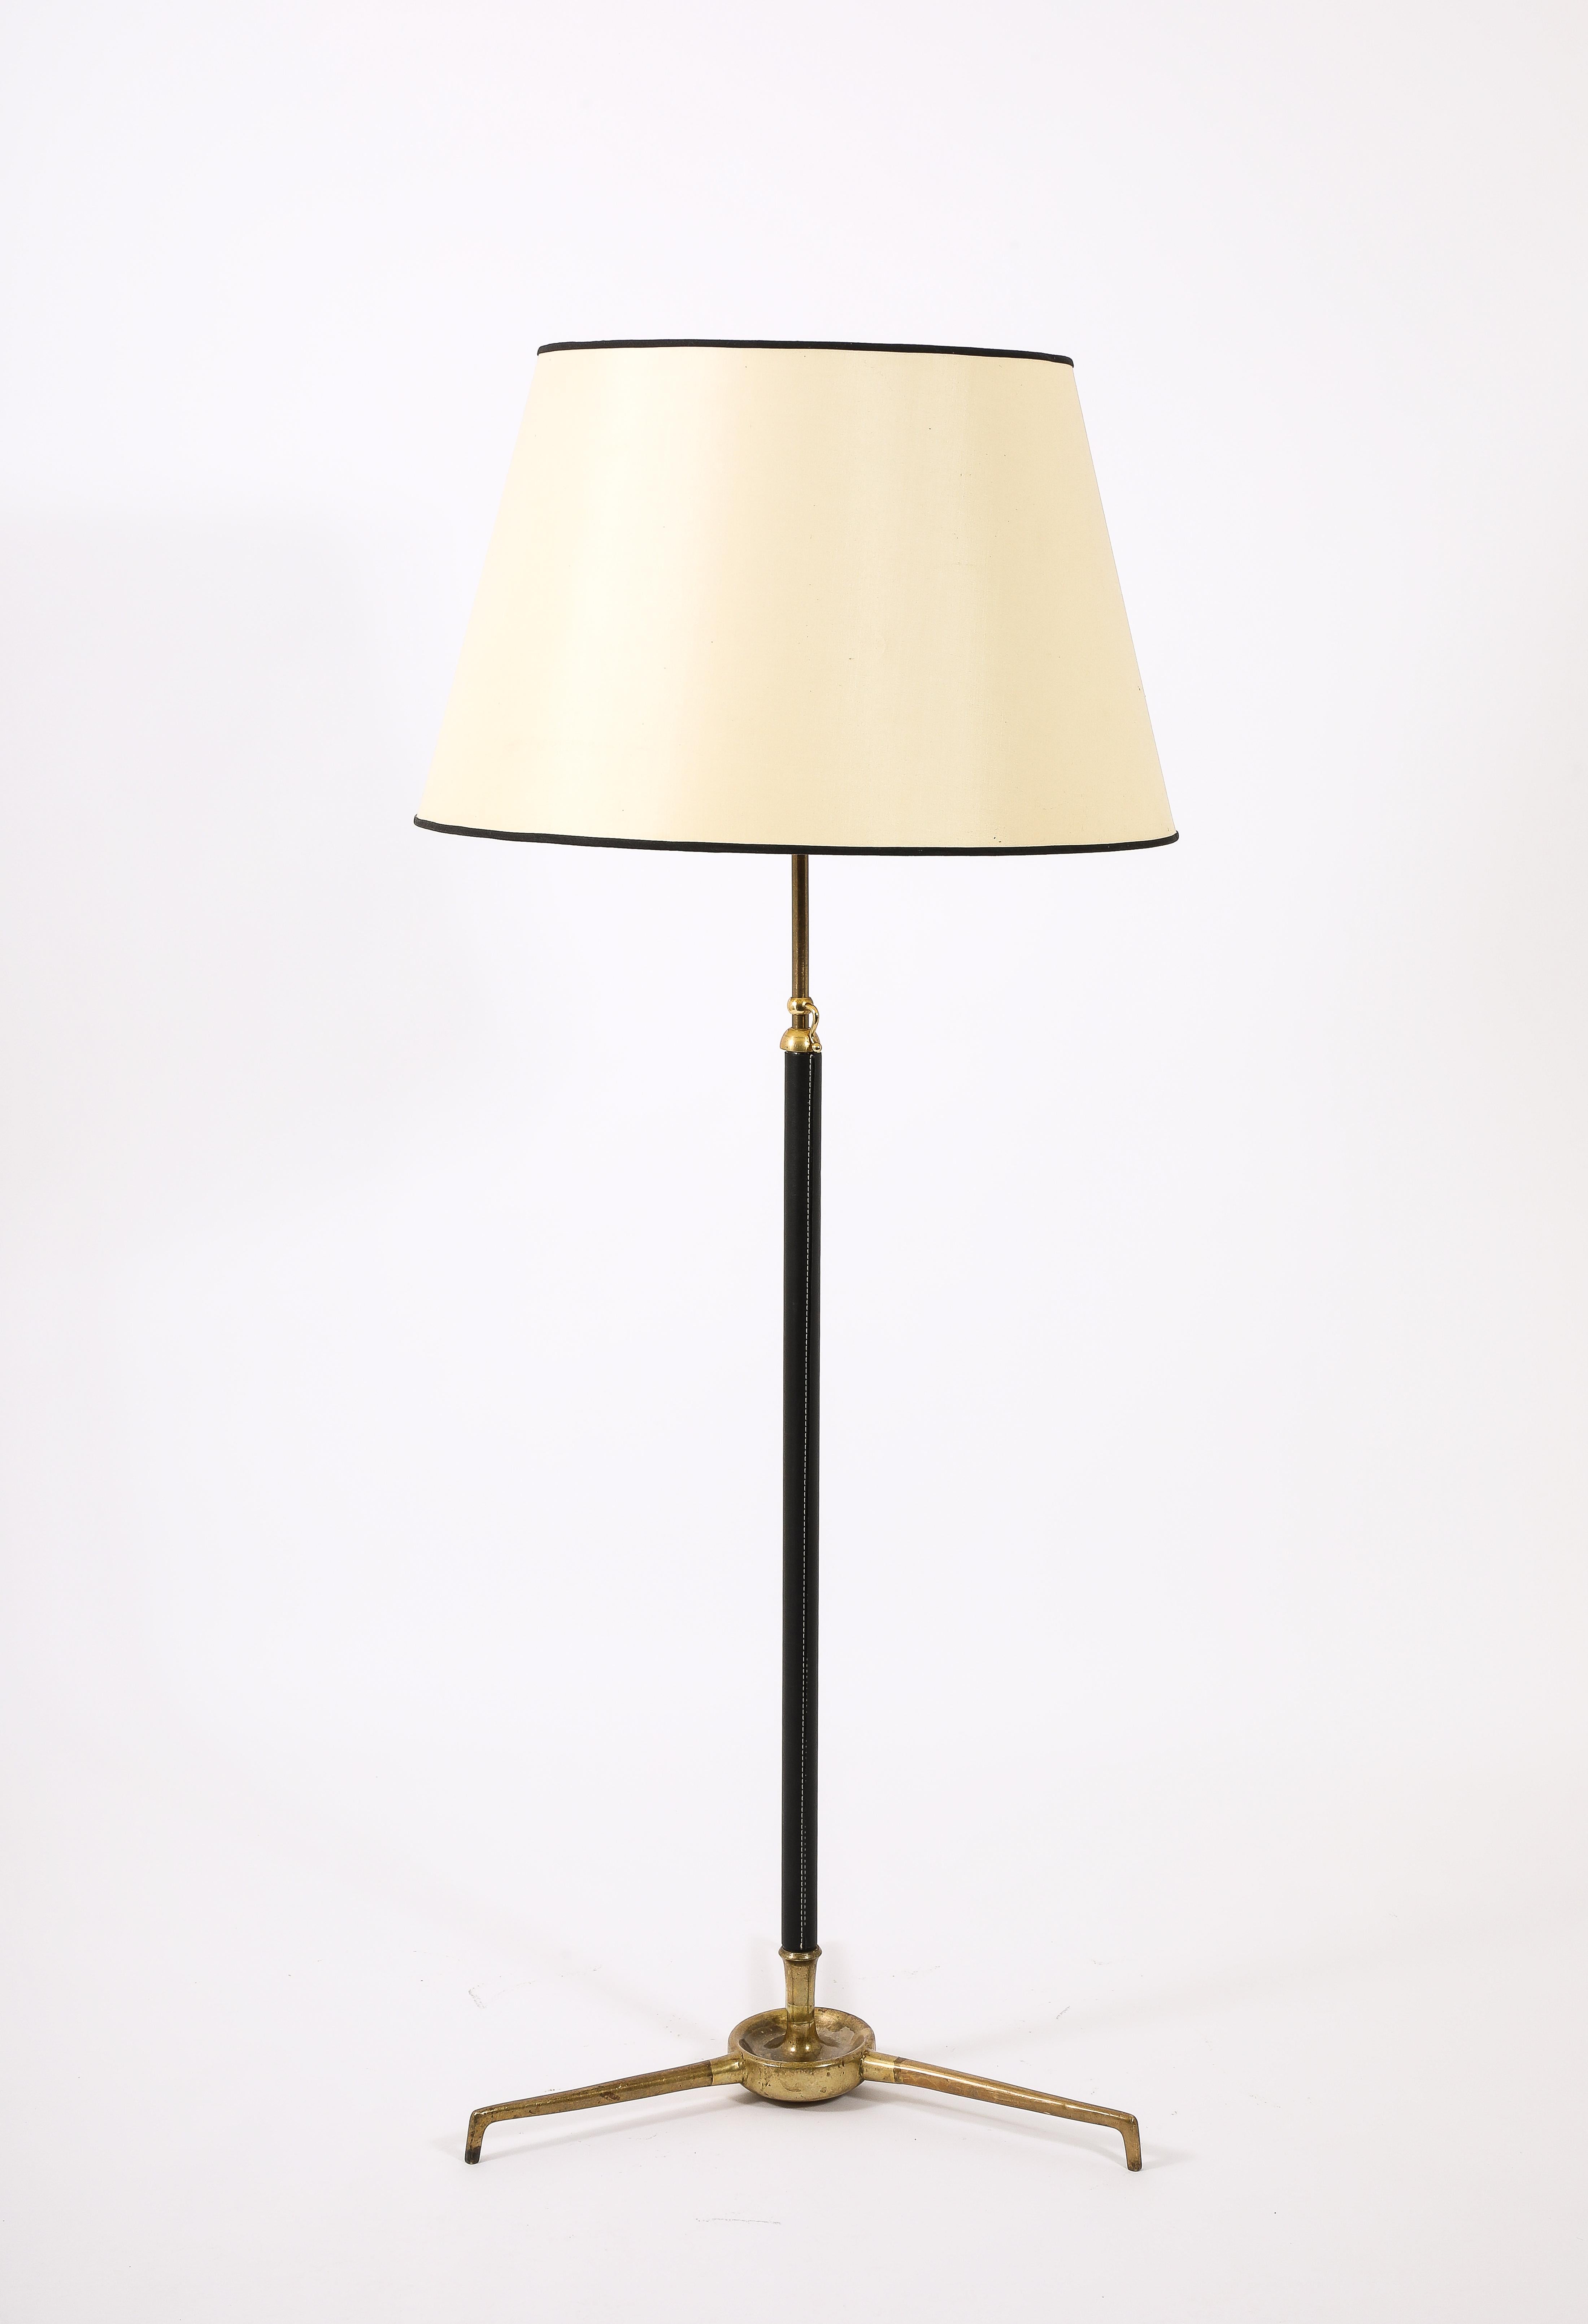 20th Century Large Bronze & Leather Floor Lamp by Arlus, France 1950's For Sale